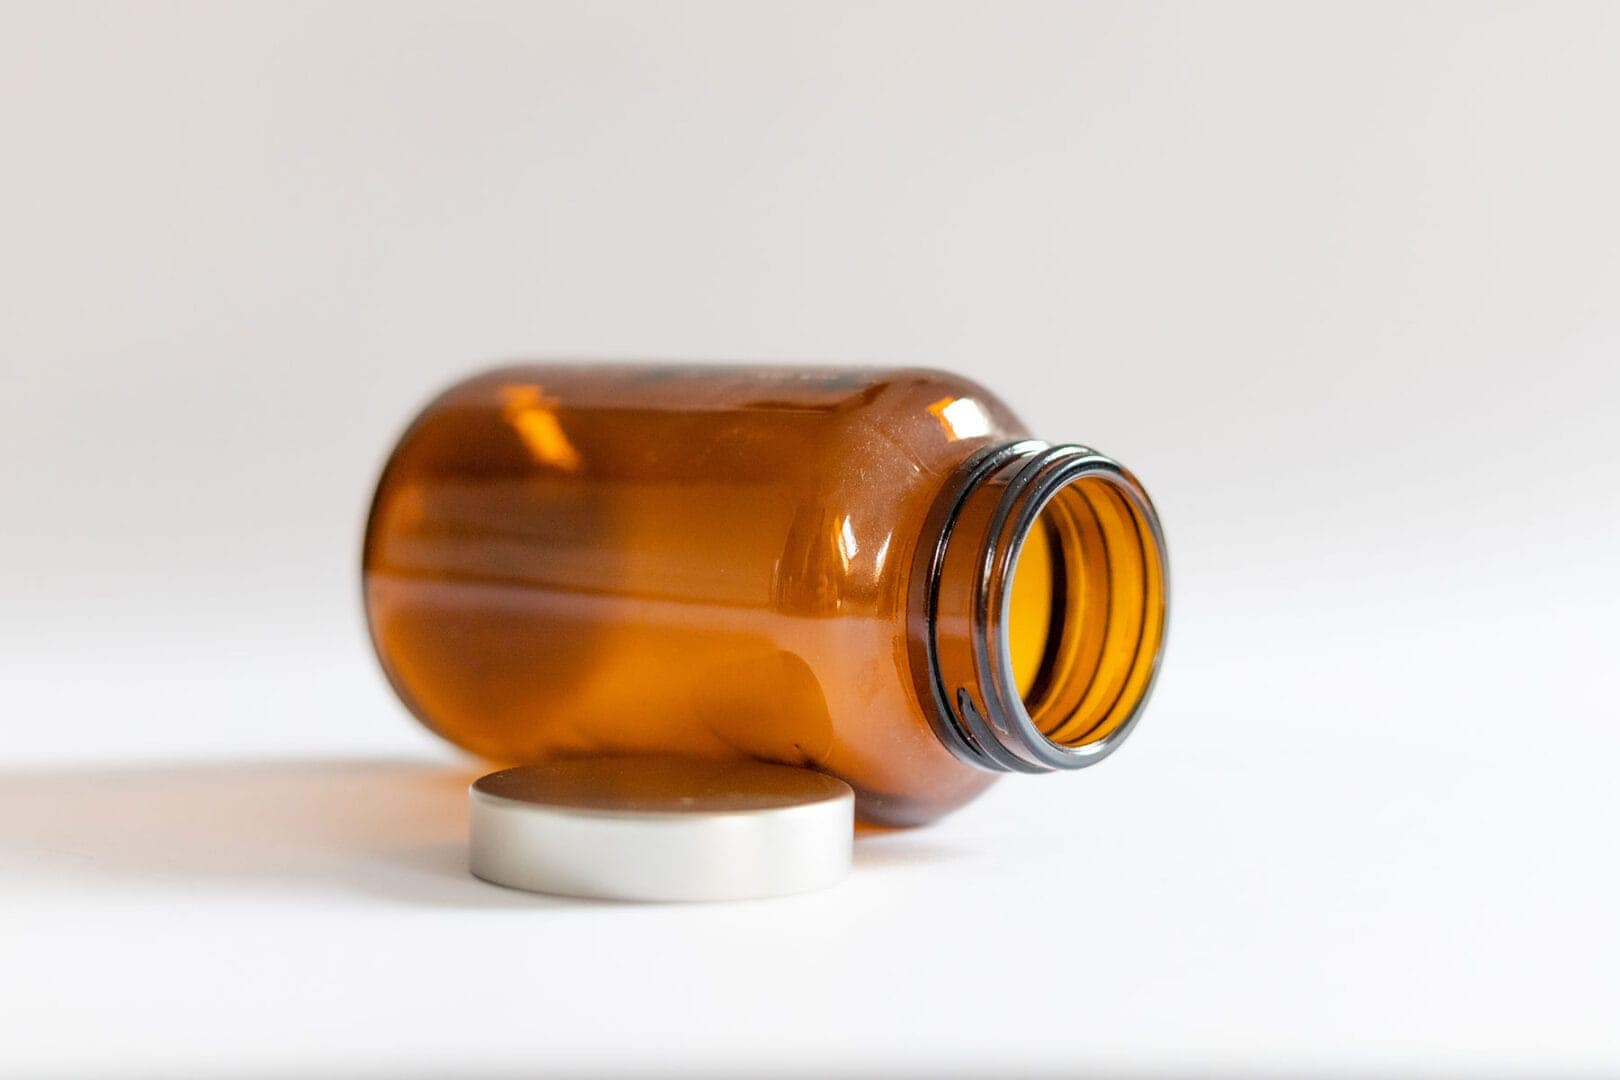 Empty bottle that could have contained commonly abused prescription drugs